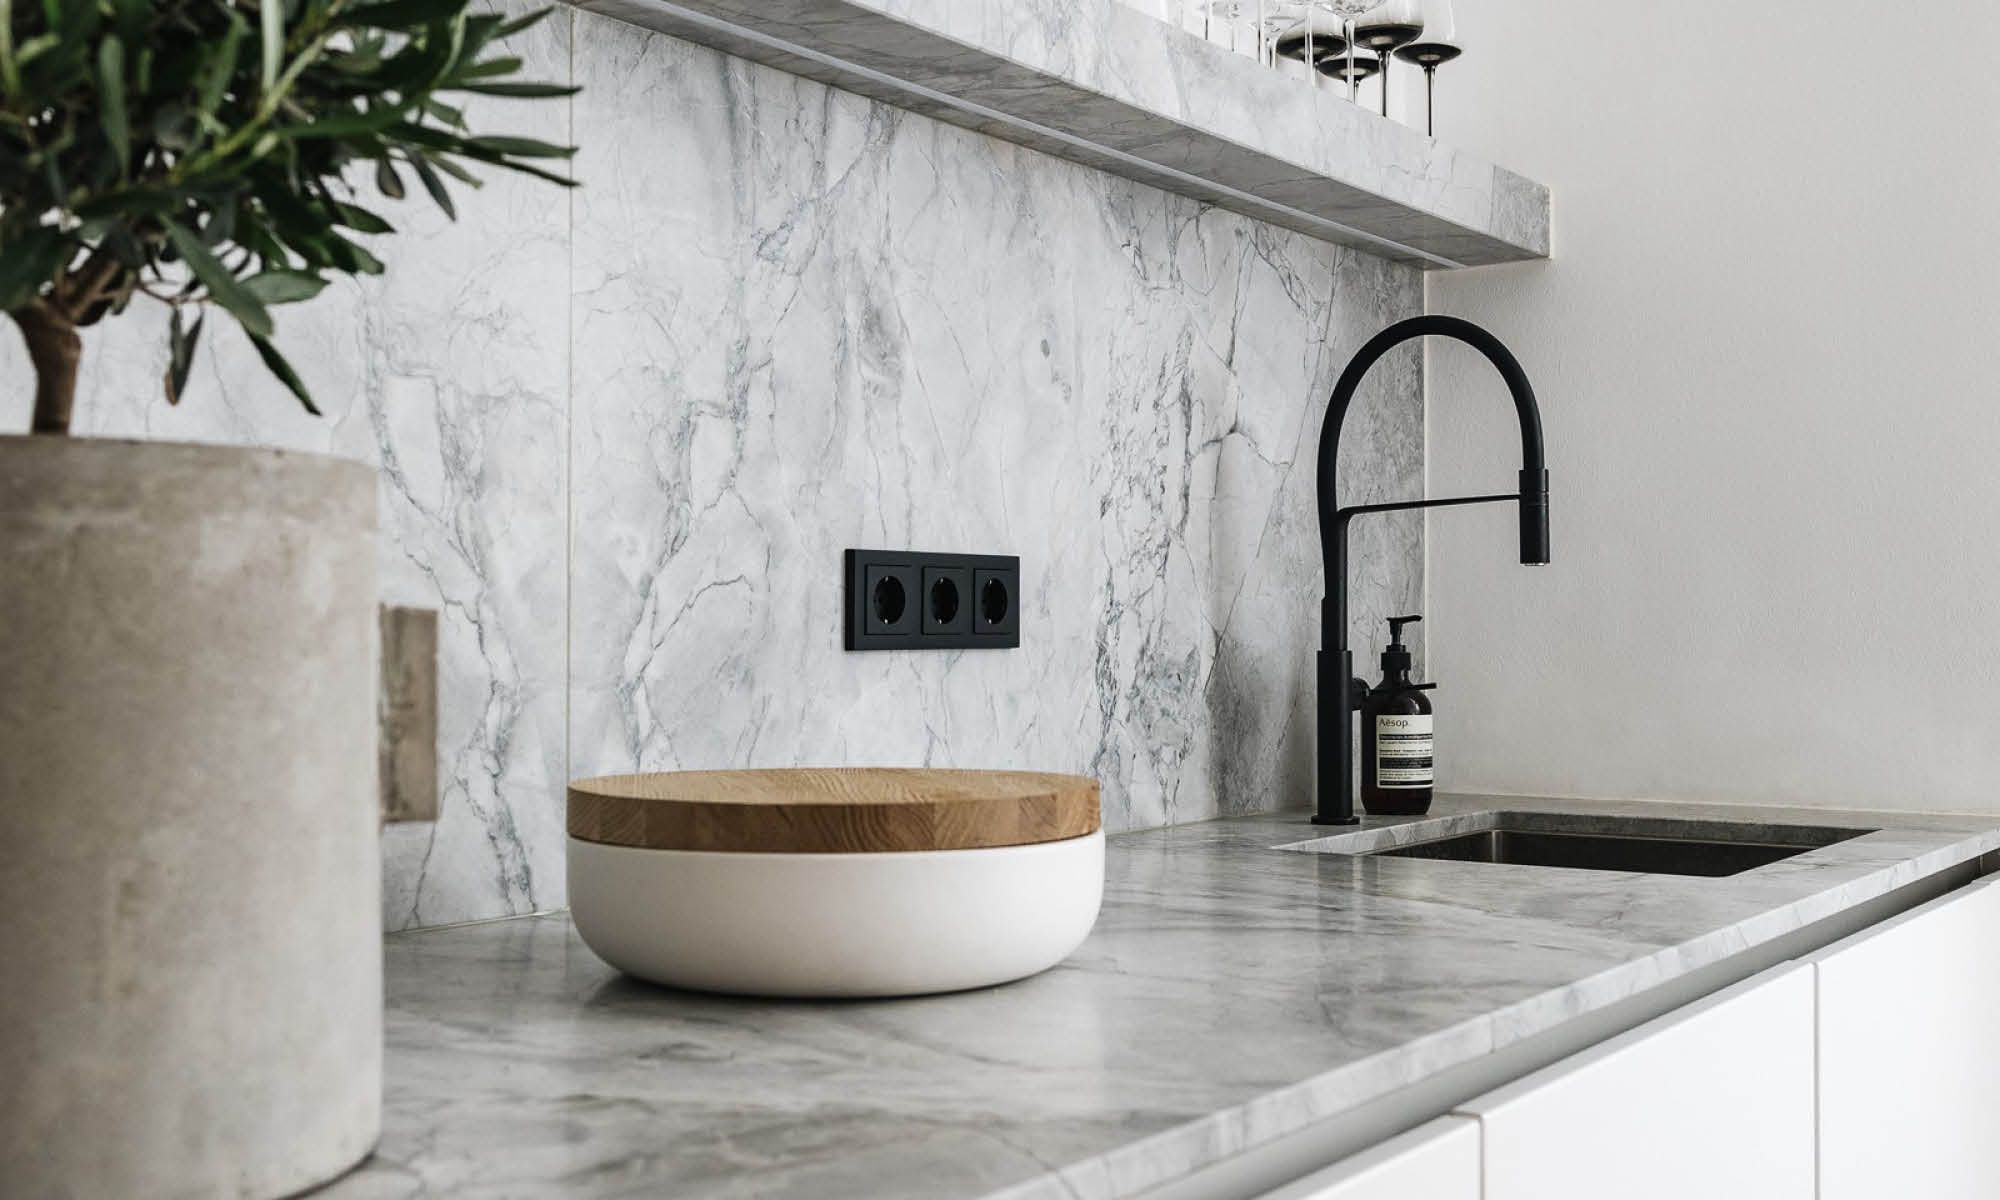 Modern kitchen with a marble countertop and backsplash featuring a black faucet, a white bowl with a wooden lid, and a potted plant.